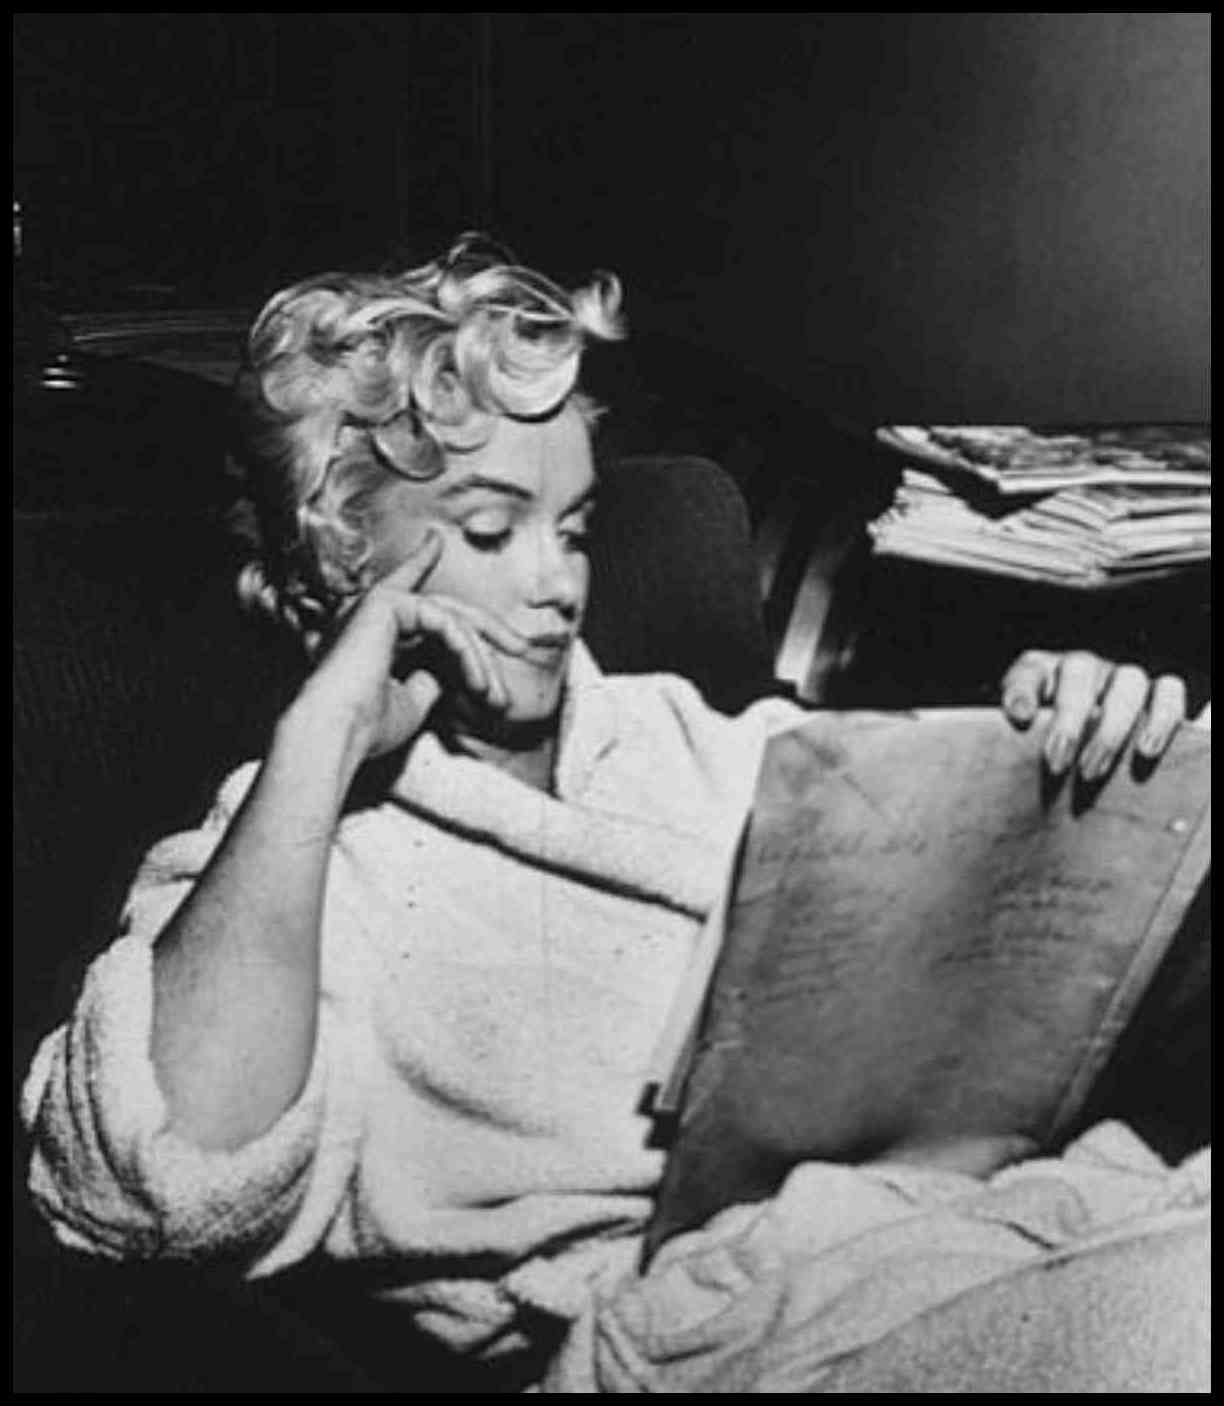 Marilyn-Monroe-Owned-Script-Maiden-Voyage-4 - The Marilyn Monroe Collection